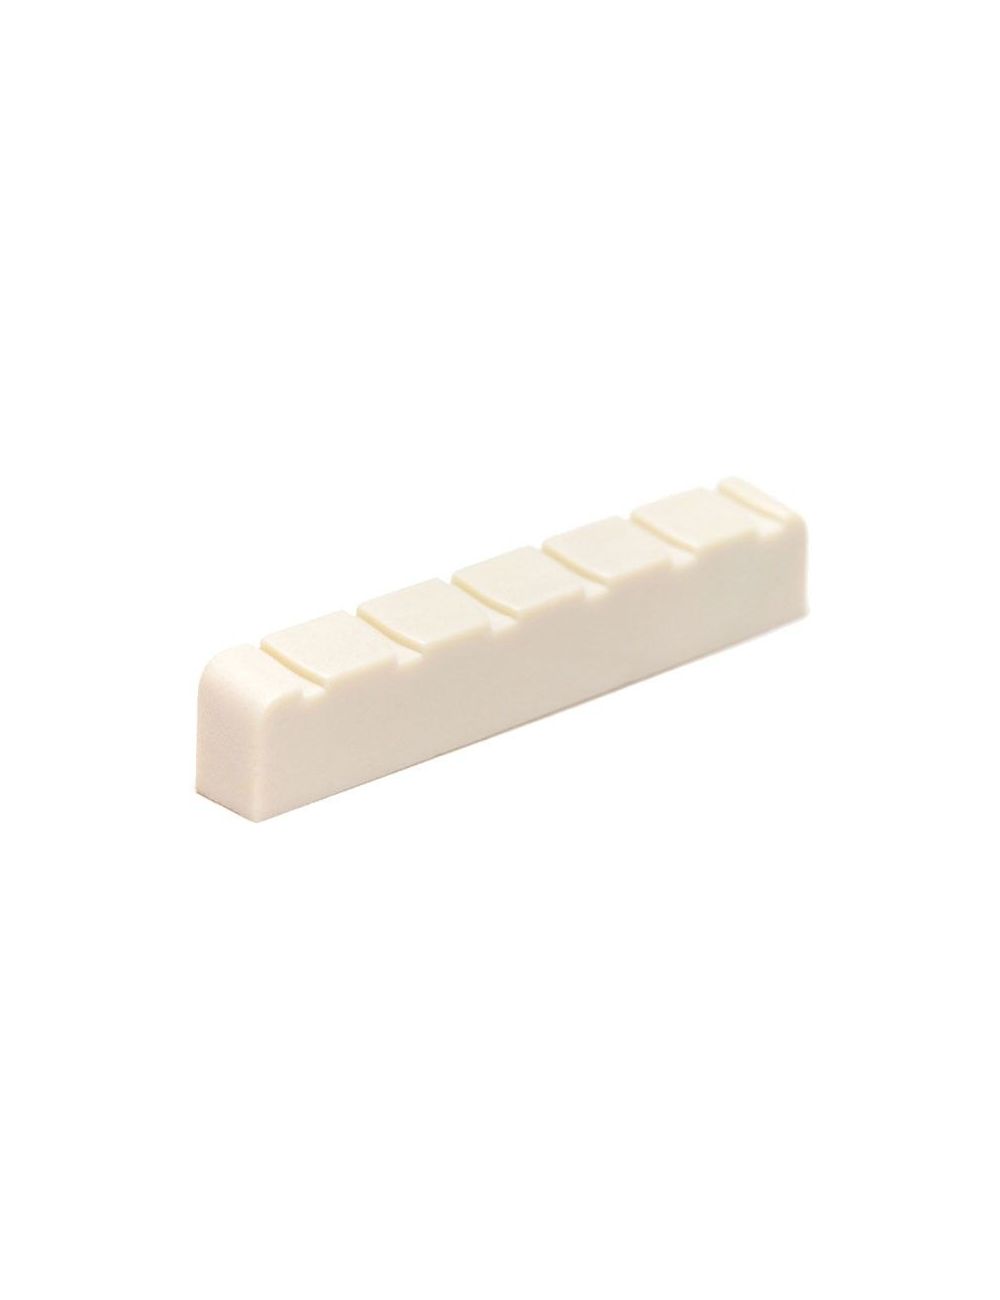 Classical guitar nut Alhambra 9646 9646 Spare parts